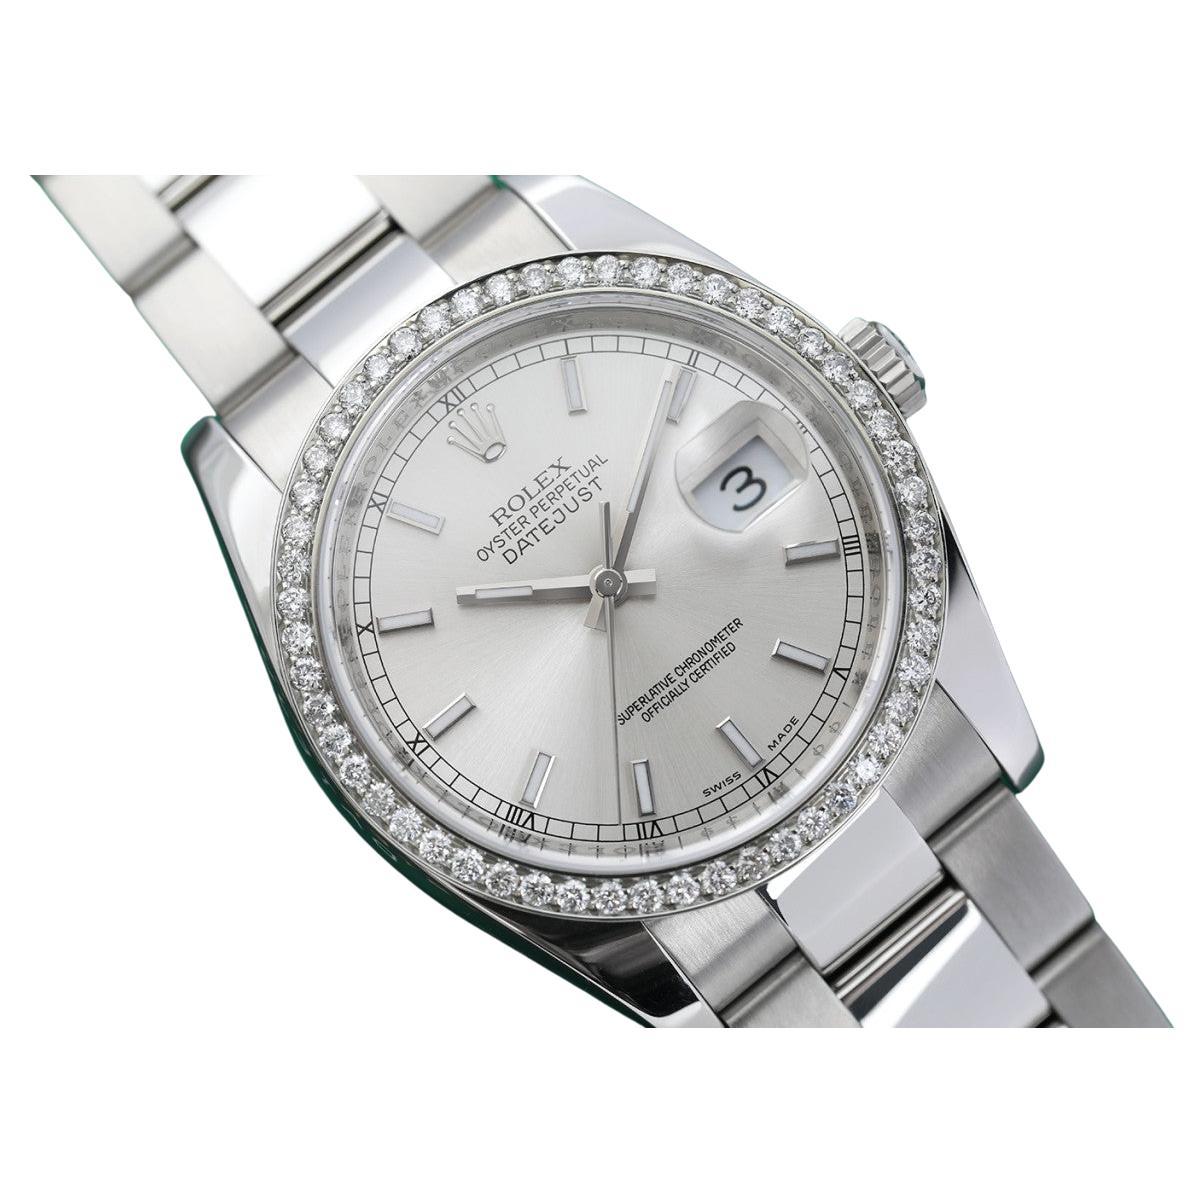 Rolex Datejust S/S New Style Diamond Bezel, Silver Index Dial 116200 For Sale